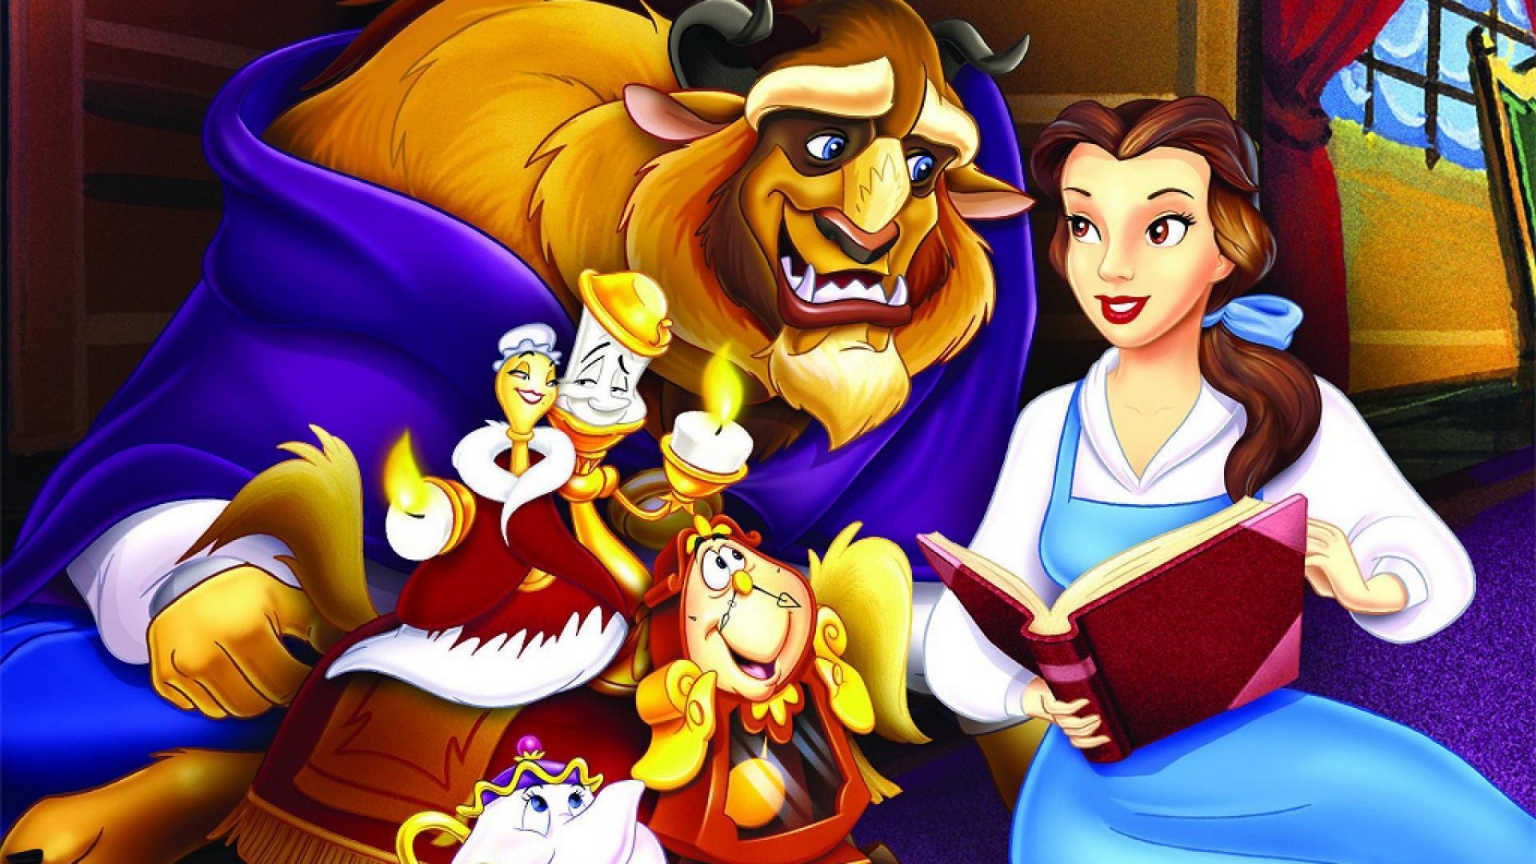 Beauty and the Beast for 1536 x 864 HDTV resolution